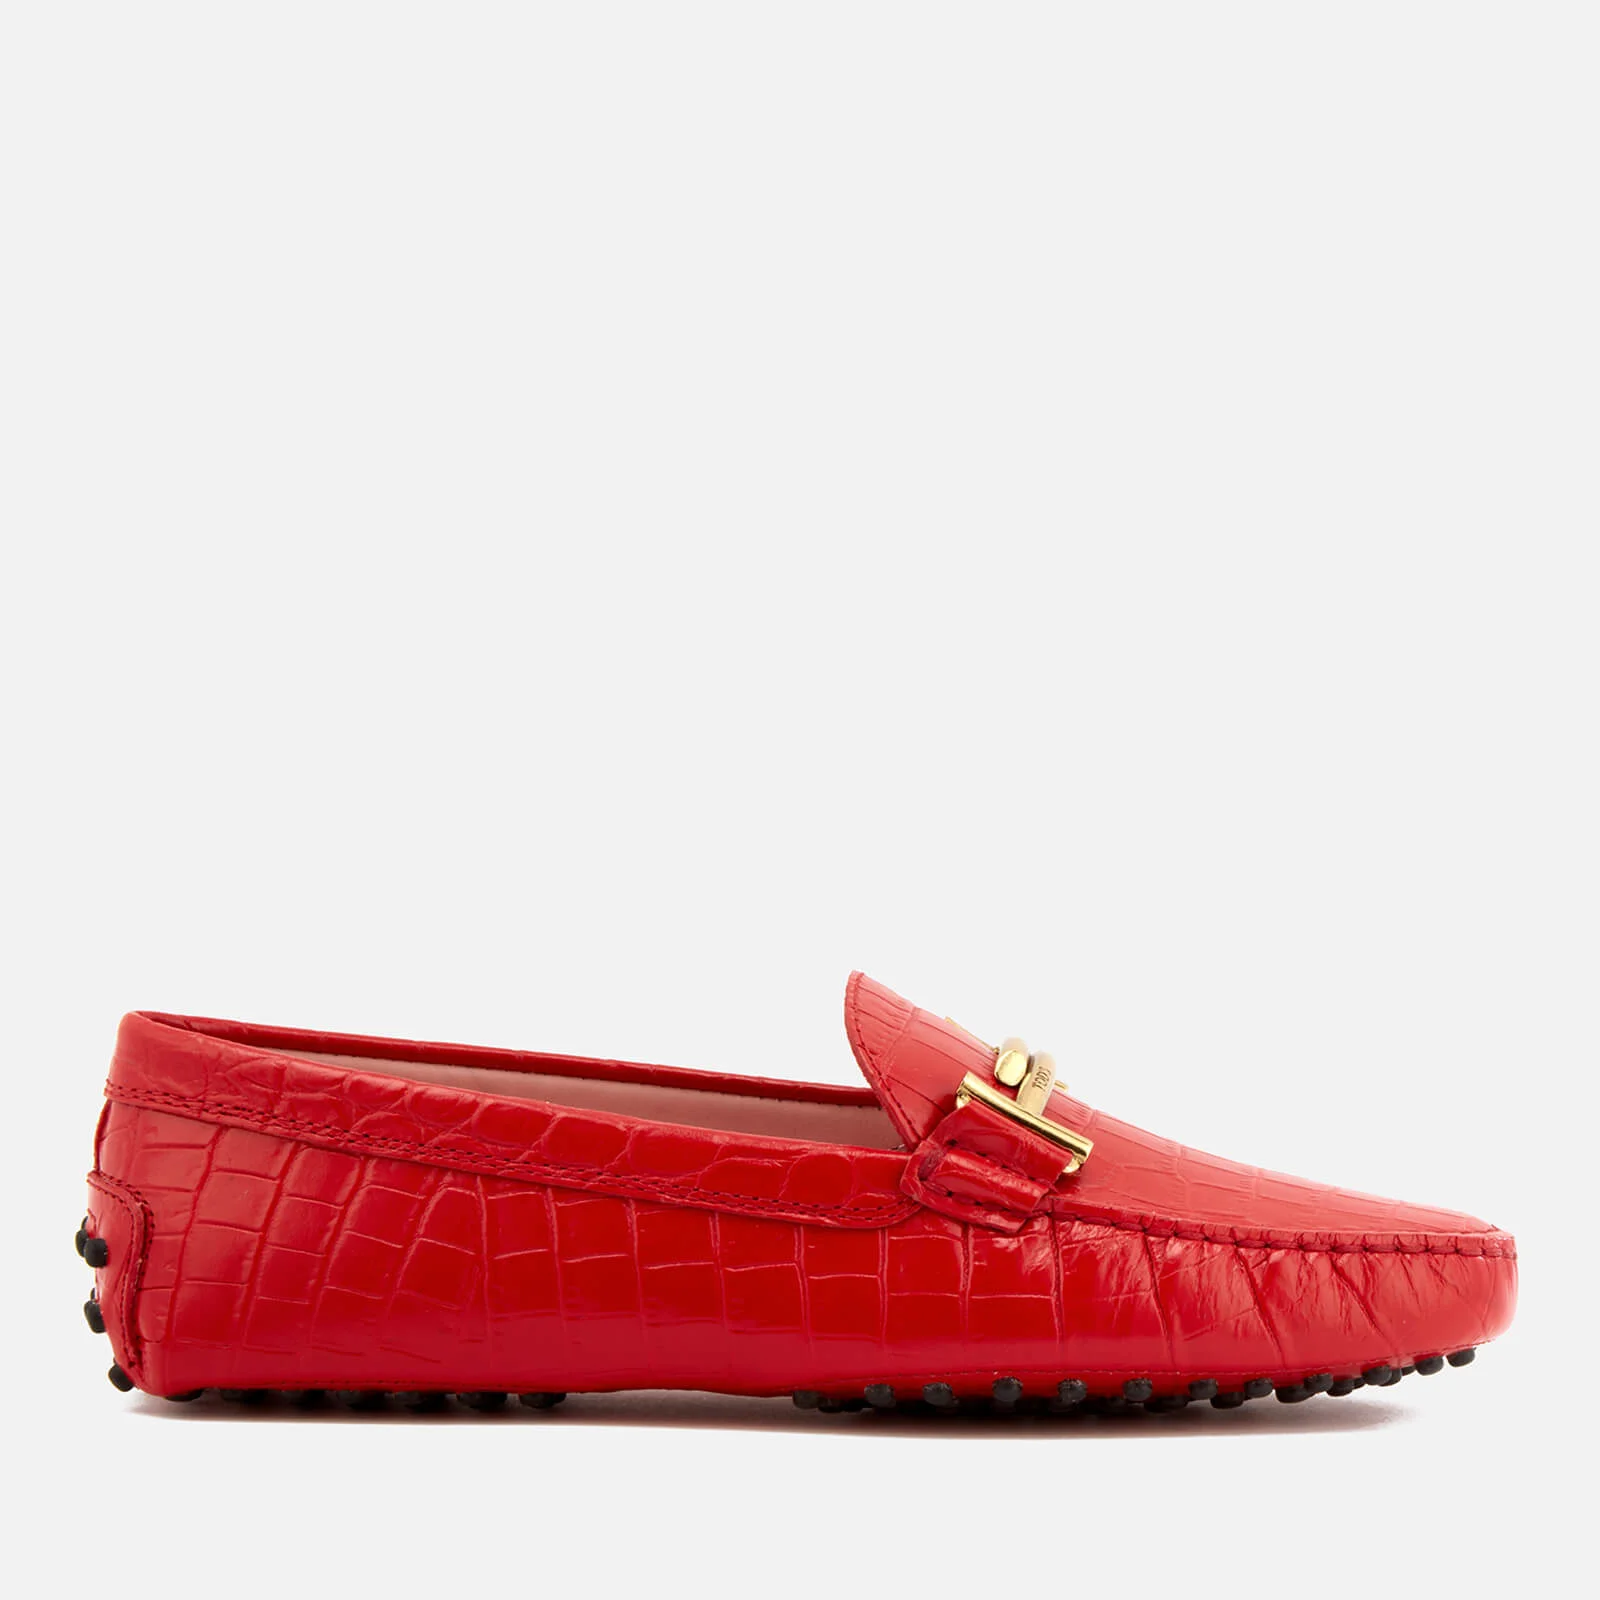 Tod's Women's Print Croc Gommino Driving Shoes - Red Image 1